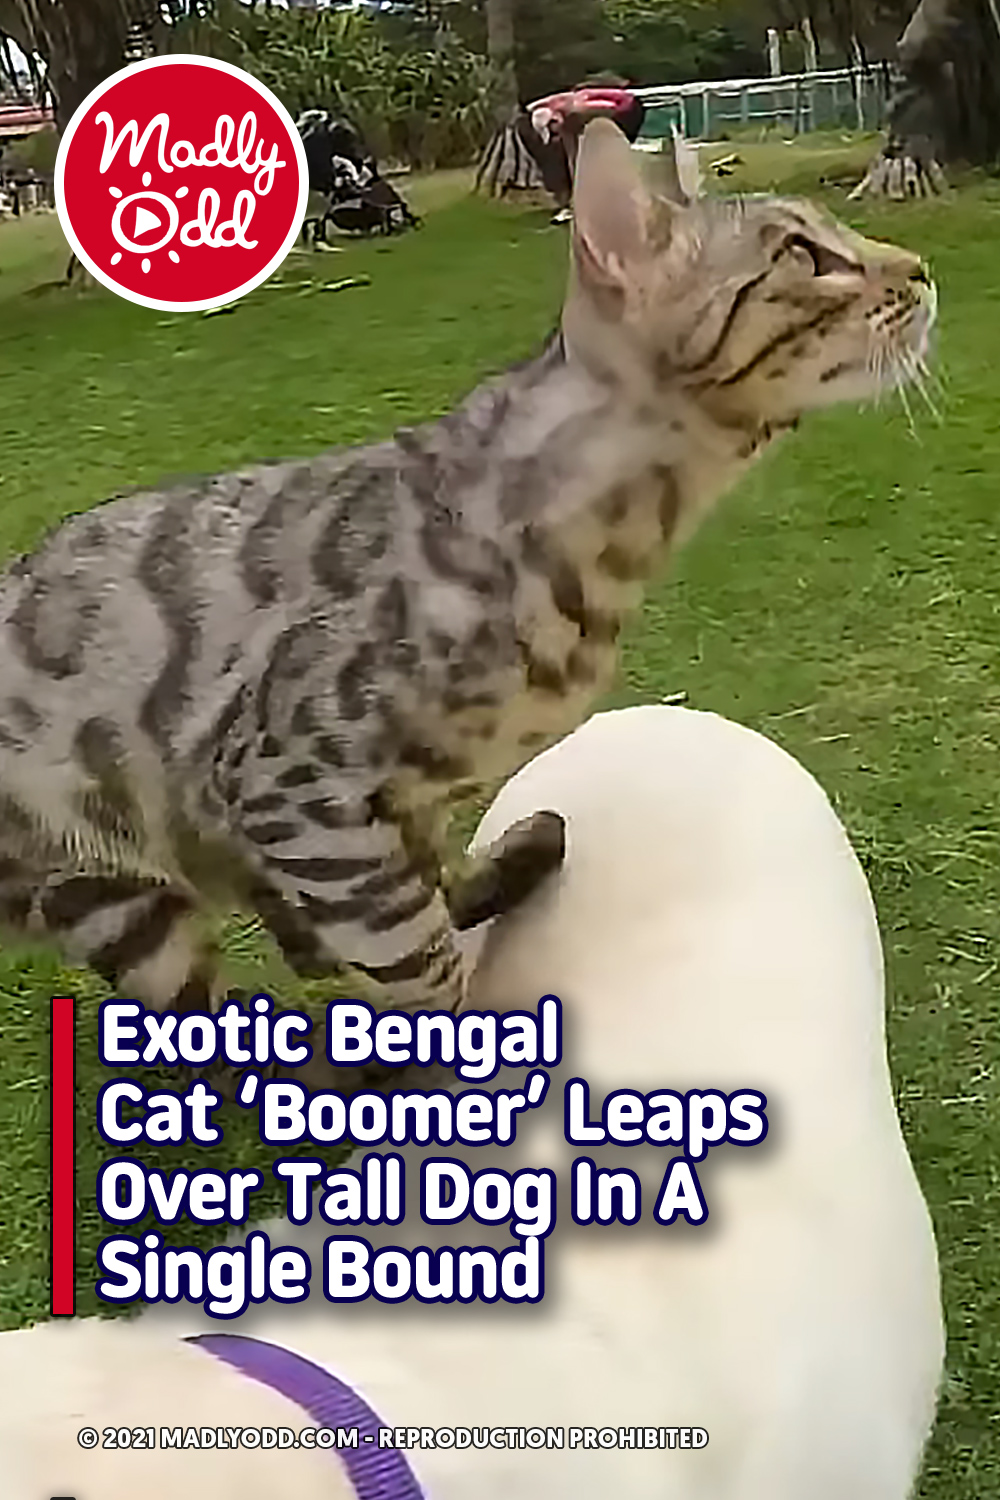 Exotic Bengal Cat ‘Boomer’ Leaps Over Tall Dog In A Single Bound